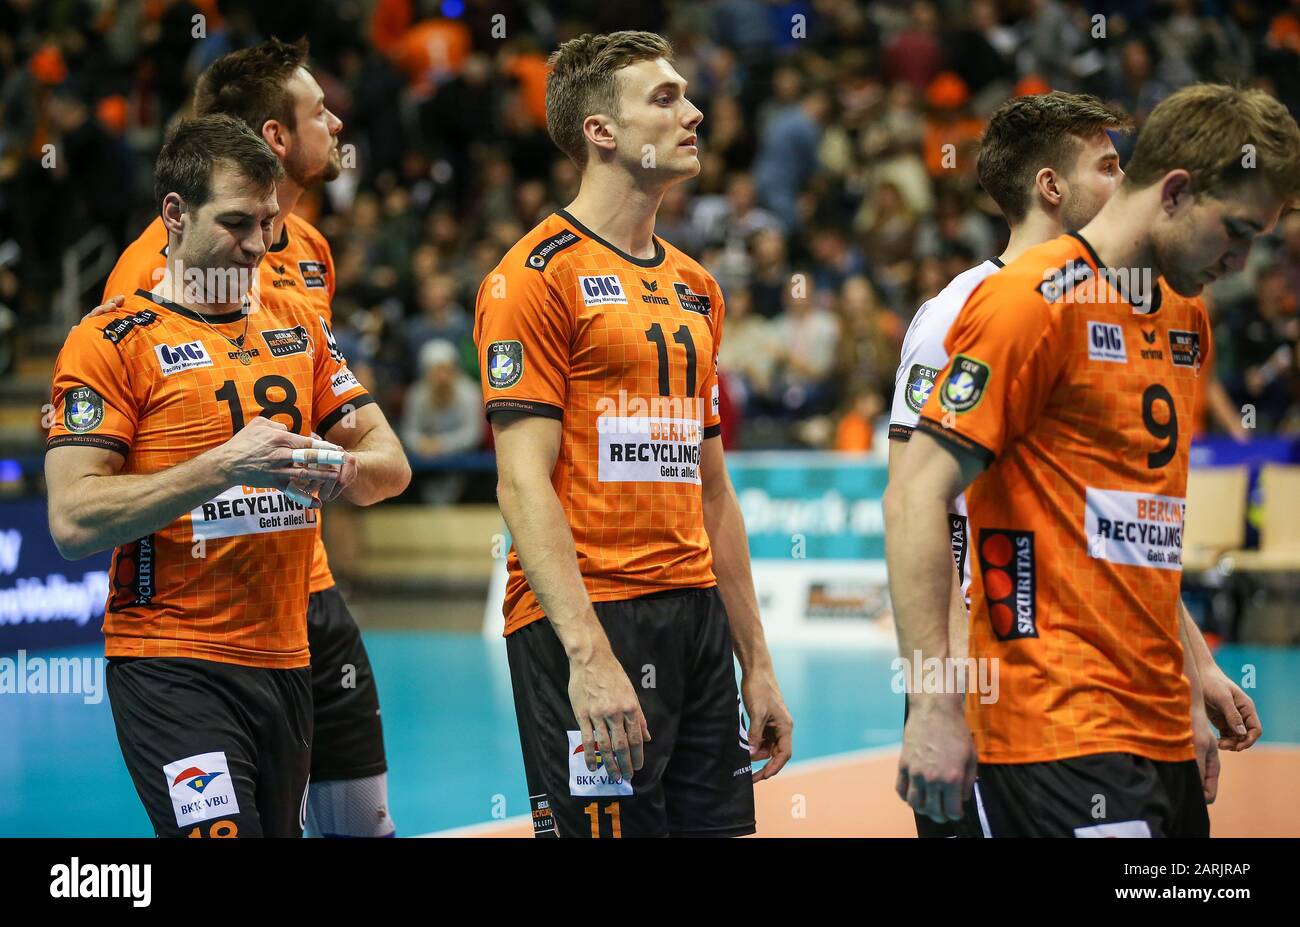 Berlin, Germany. 28th Jan, 2020. Volleyball, men: Champions League, Berlin  Volleys - Fakel Nowy Urengoi, 4th round, Group B, 4th matchday,  Max-Schmeling-Halle. BR Volleys Pierre Pujol (l-r), Georg Klein, Cody  Kessel, Julian